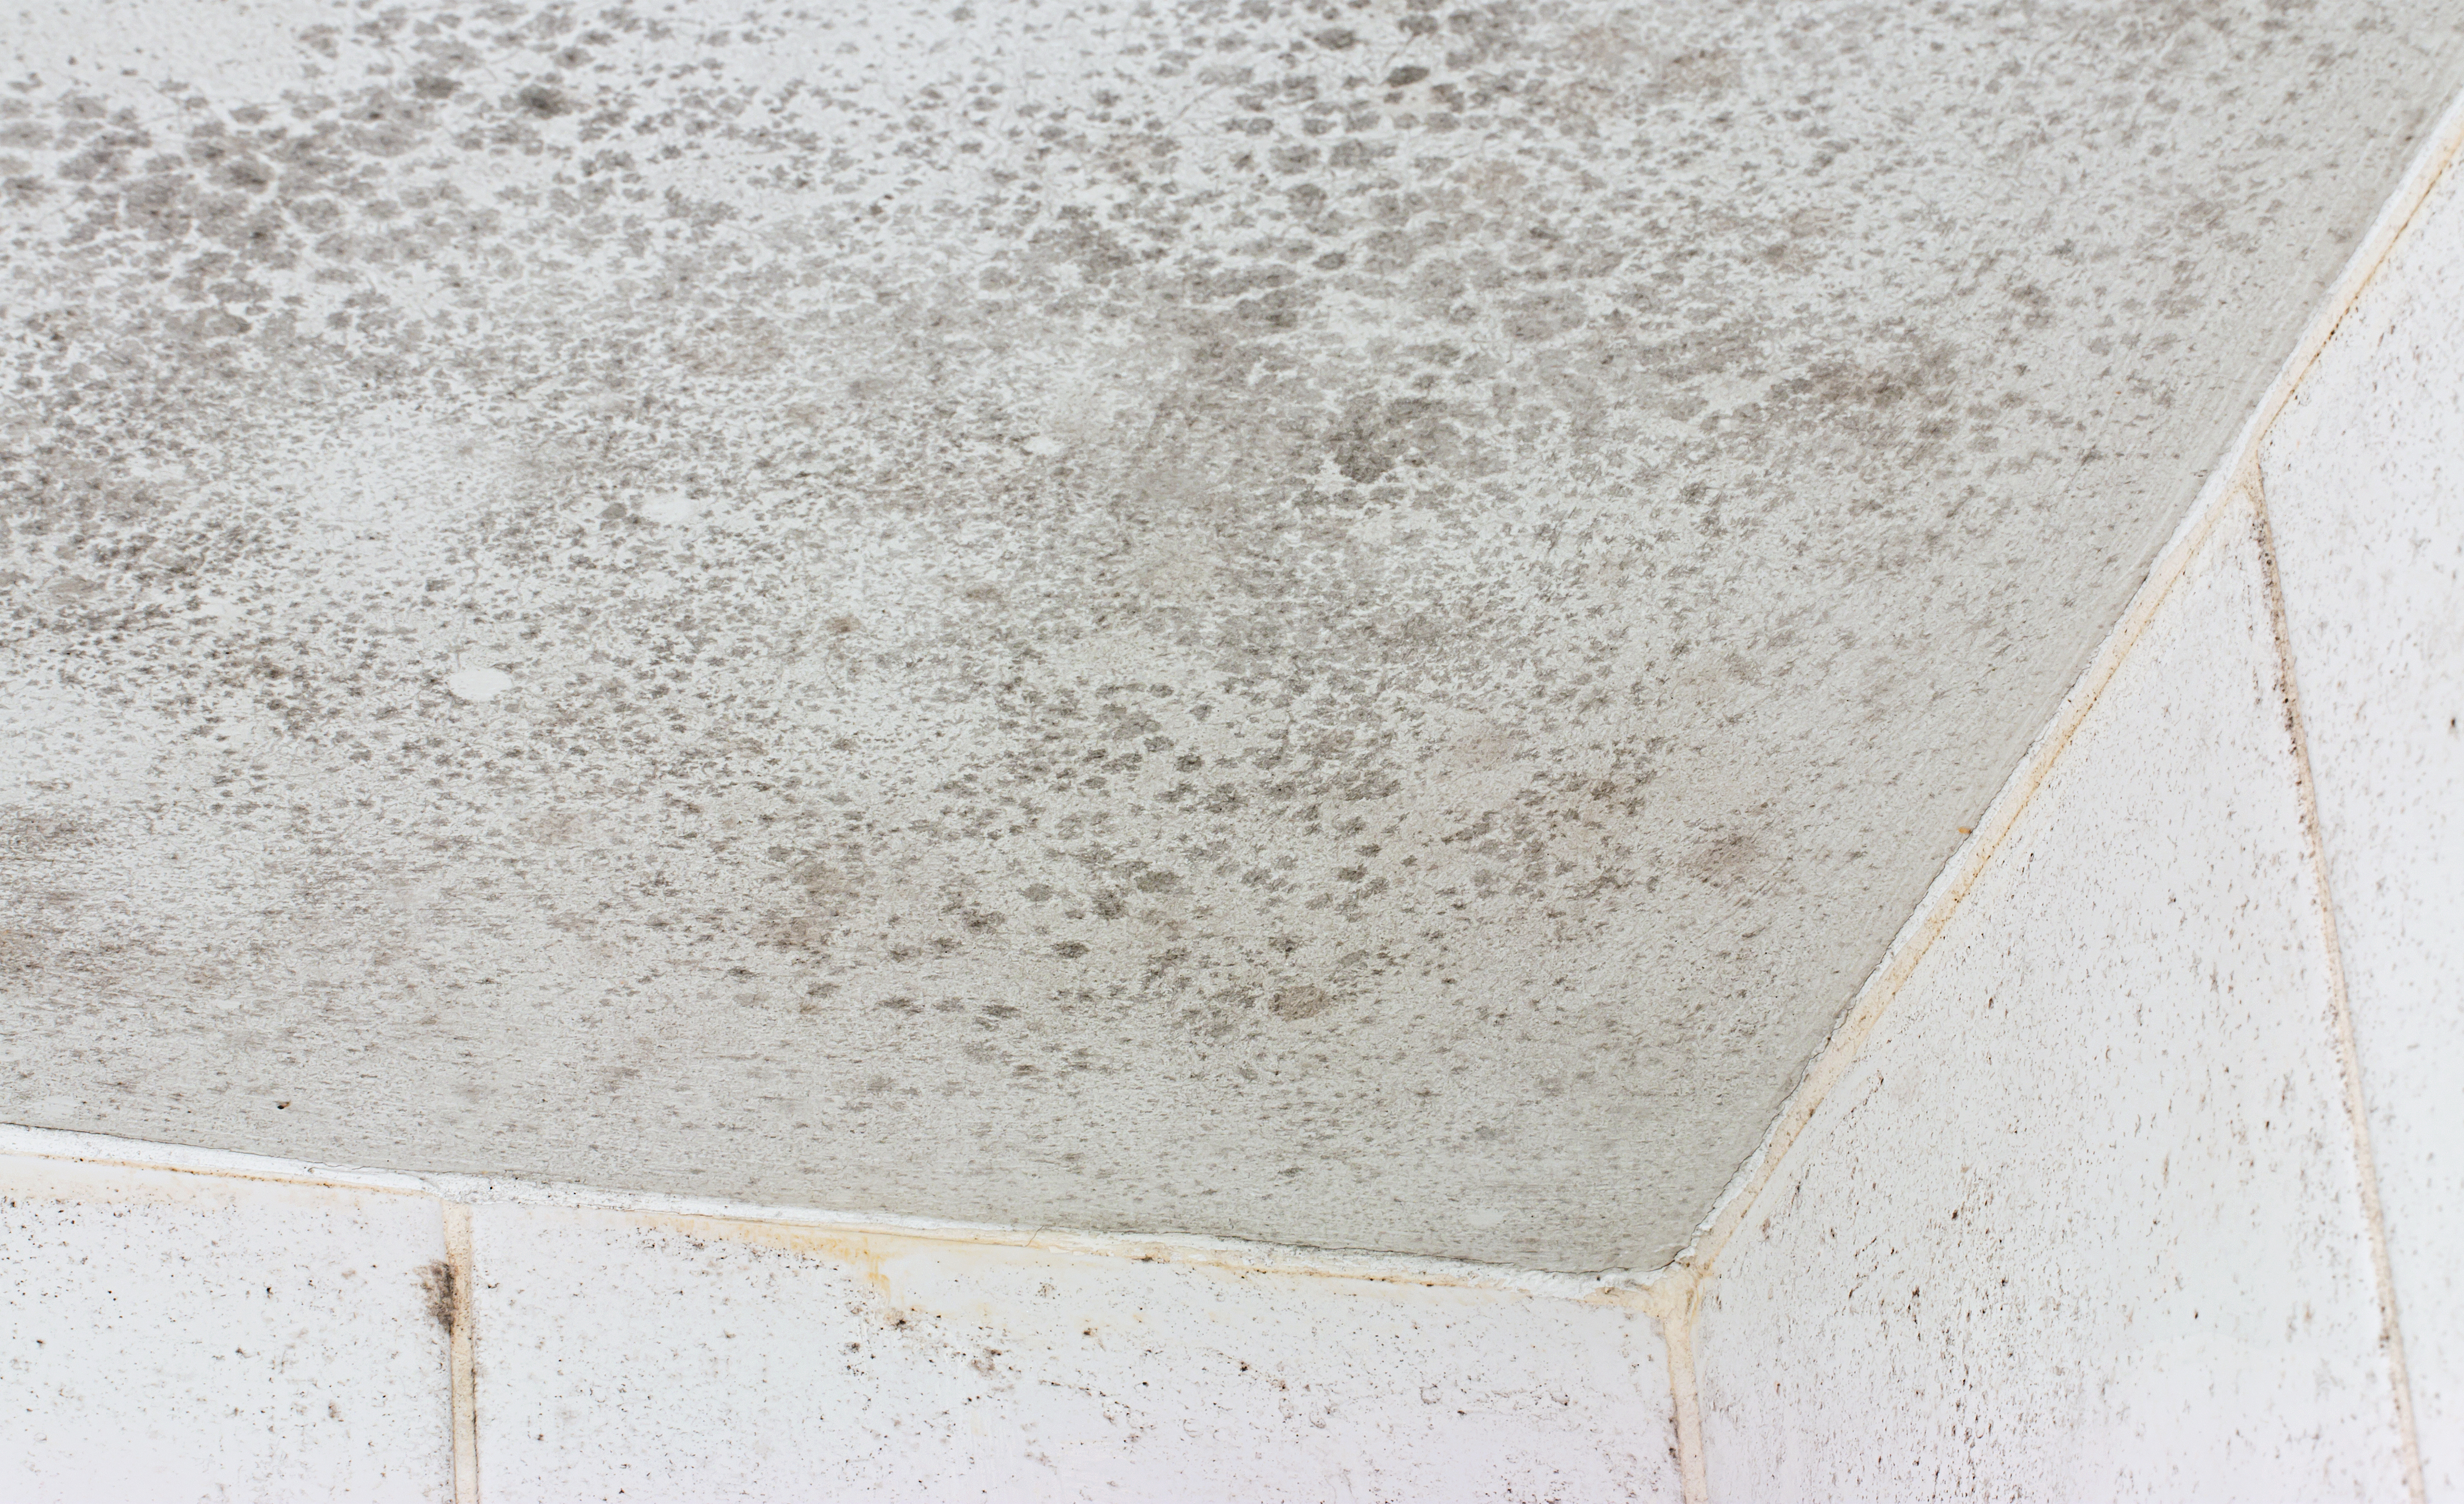 How do you remove ceiling mold?